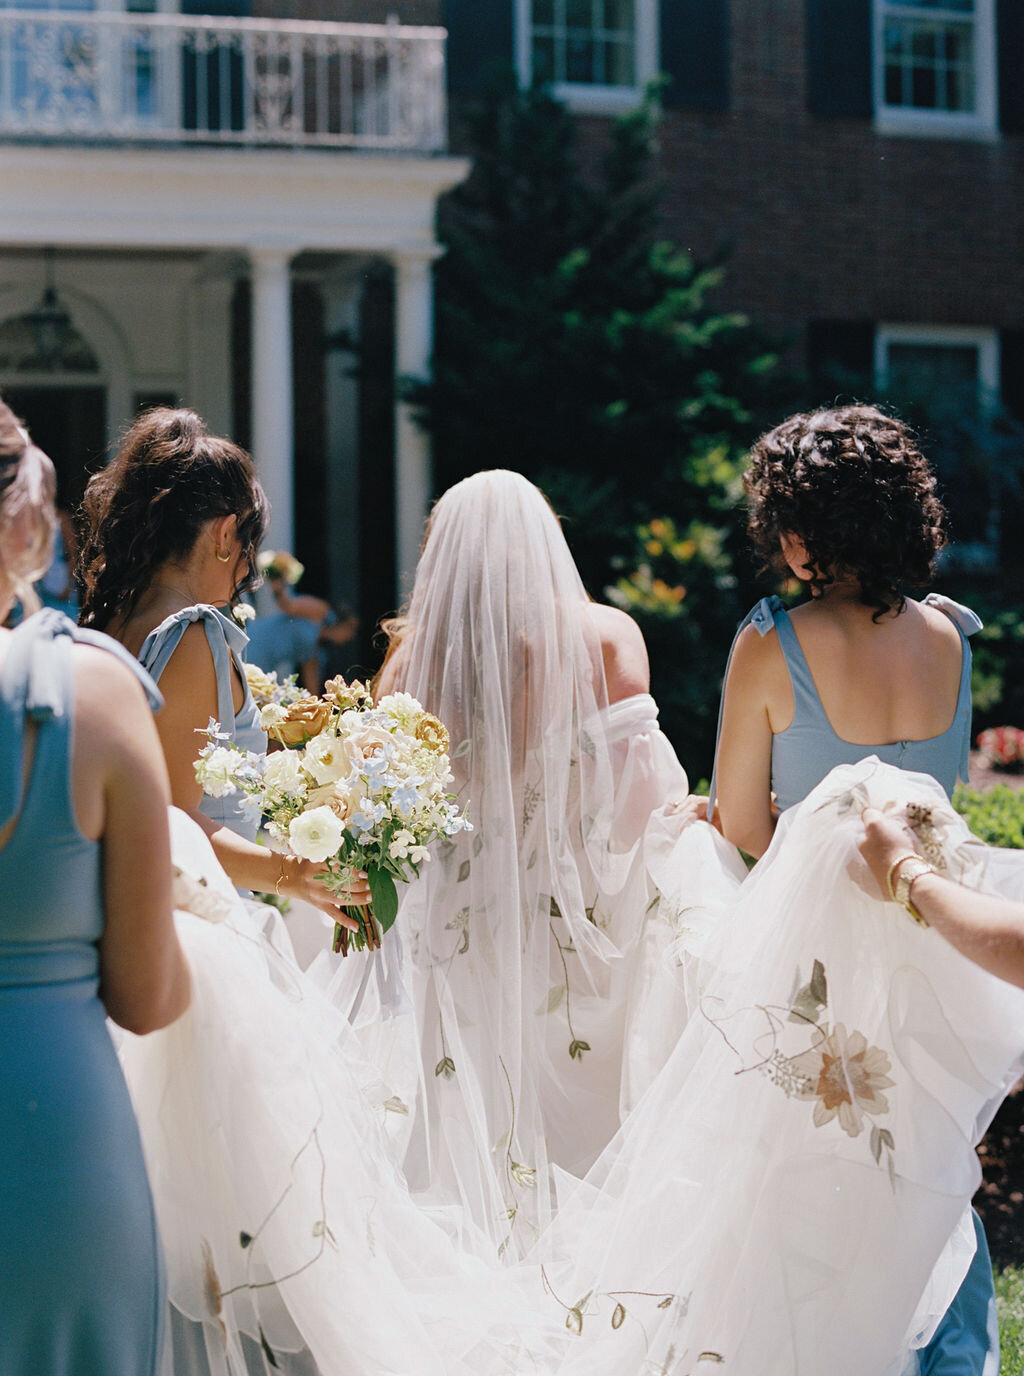 Bridesmaids in blue dresses carrying bride’s flower embroidered veil, train and bridal bouquet.